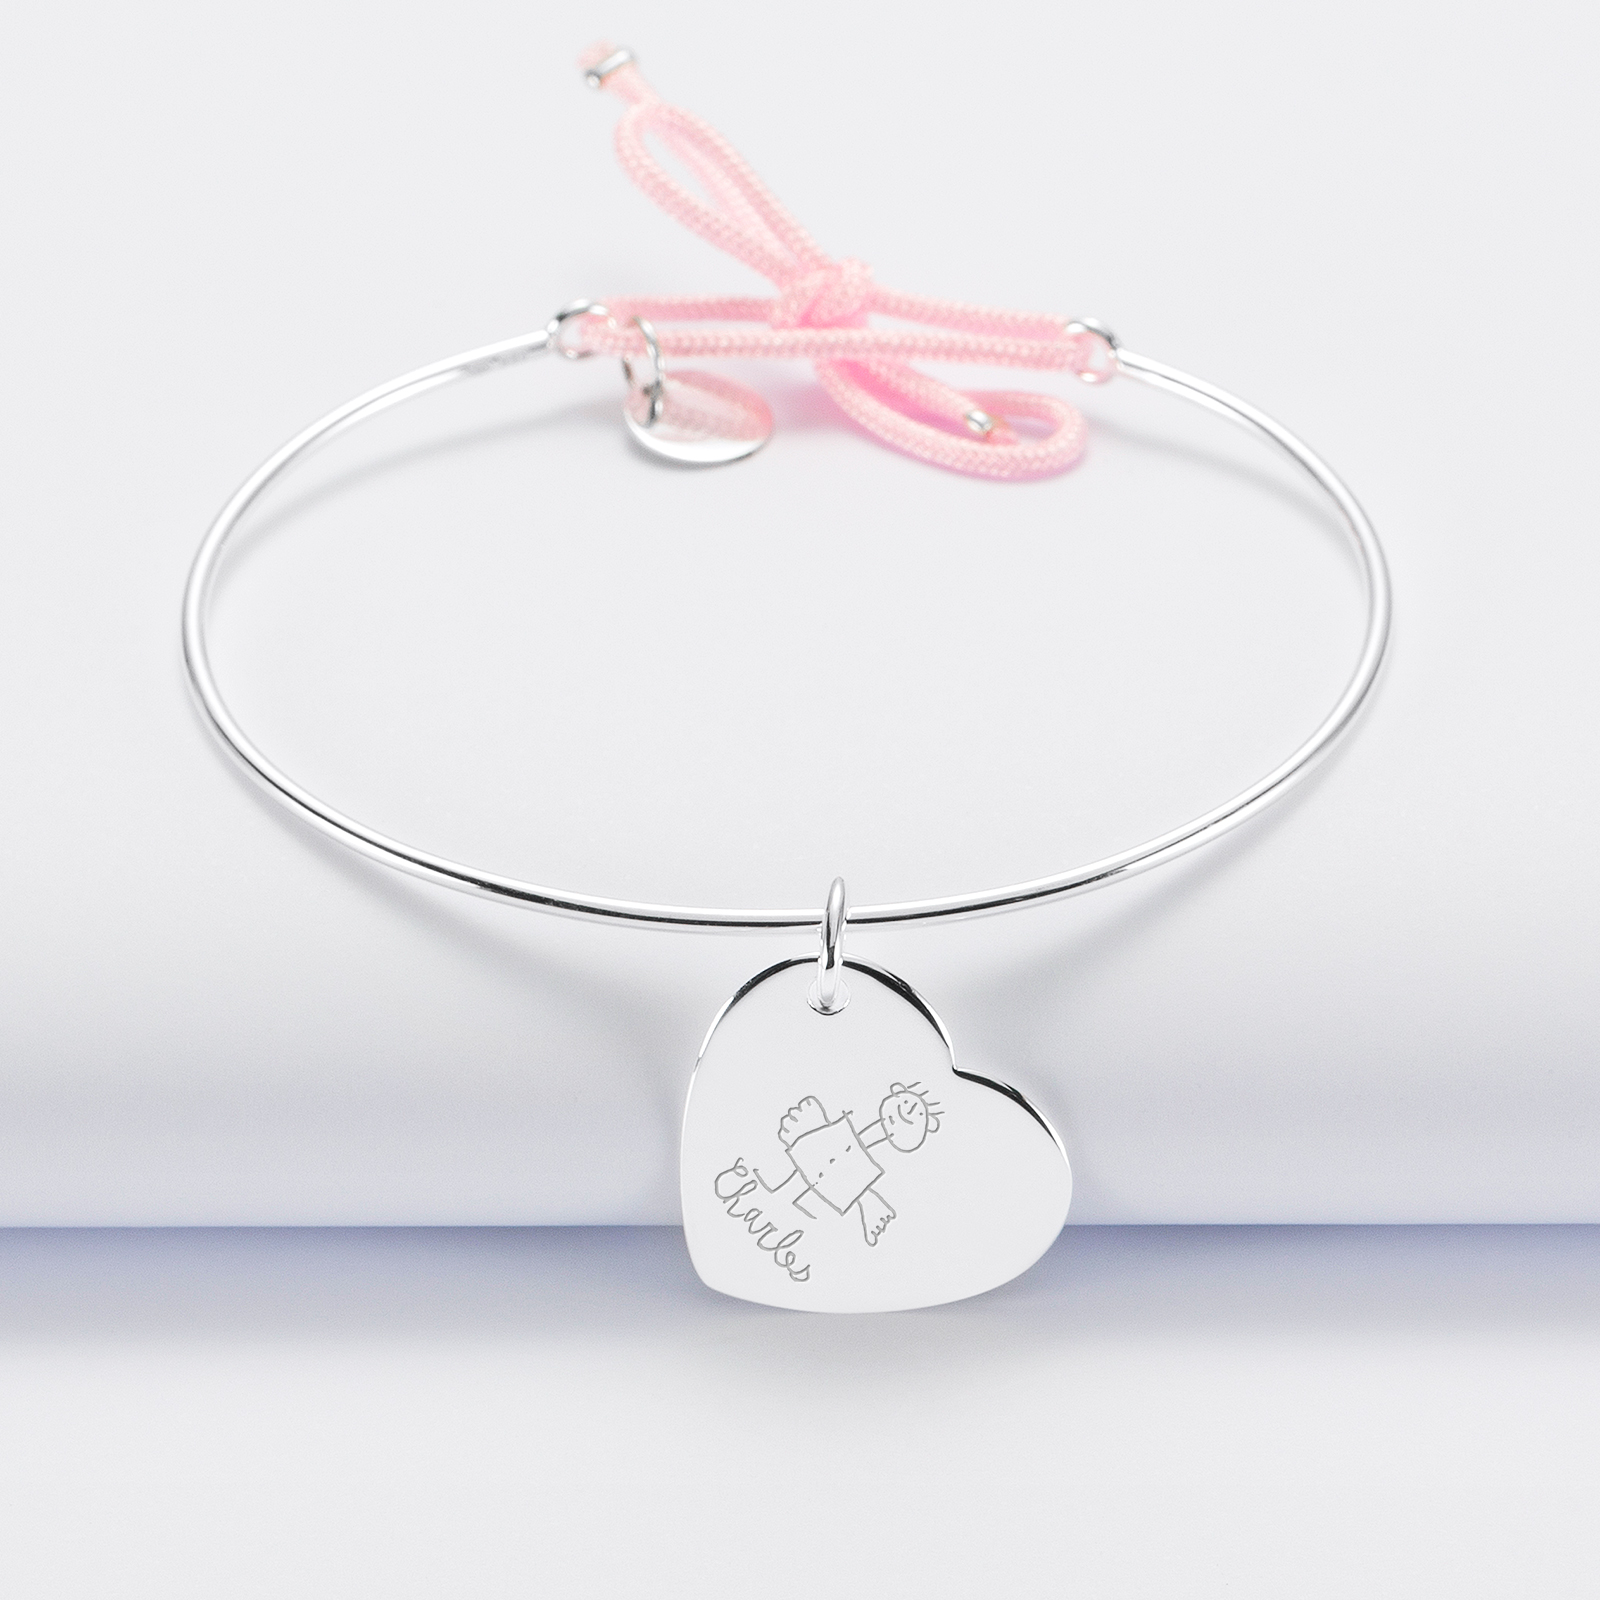 Personalised silver and cord bangle bracelet and engraved silver heart medallion 19x21mm - sketch